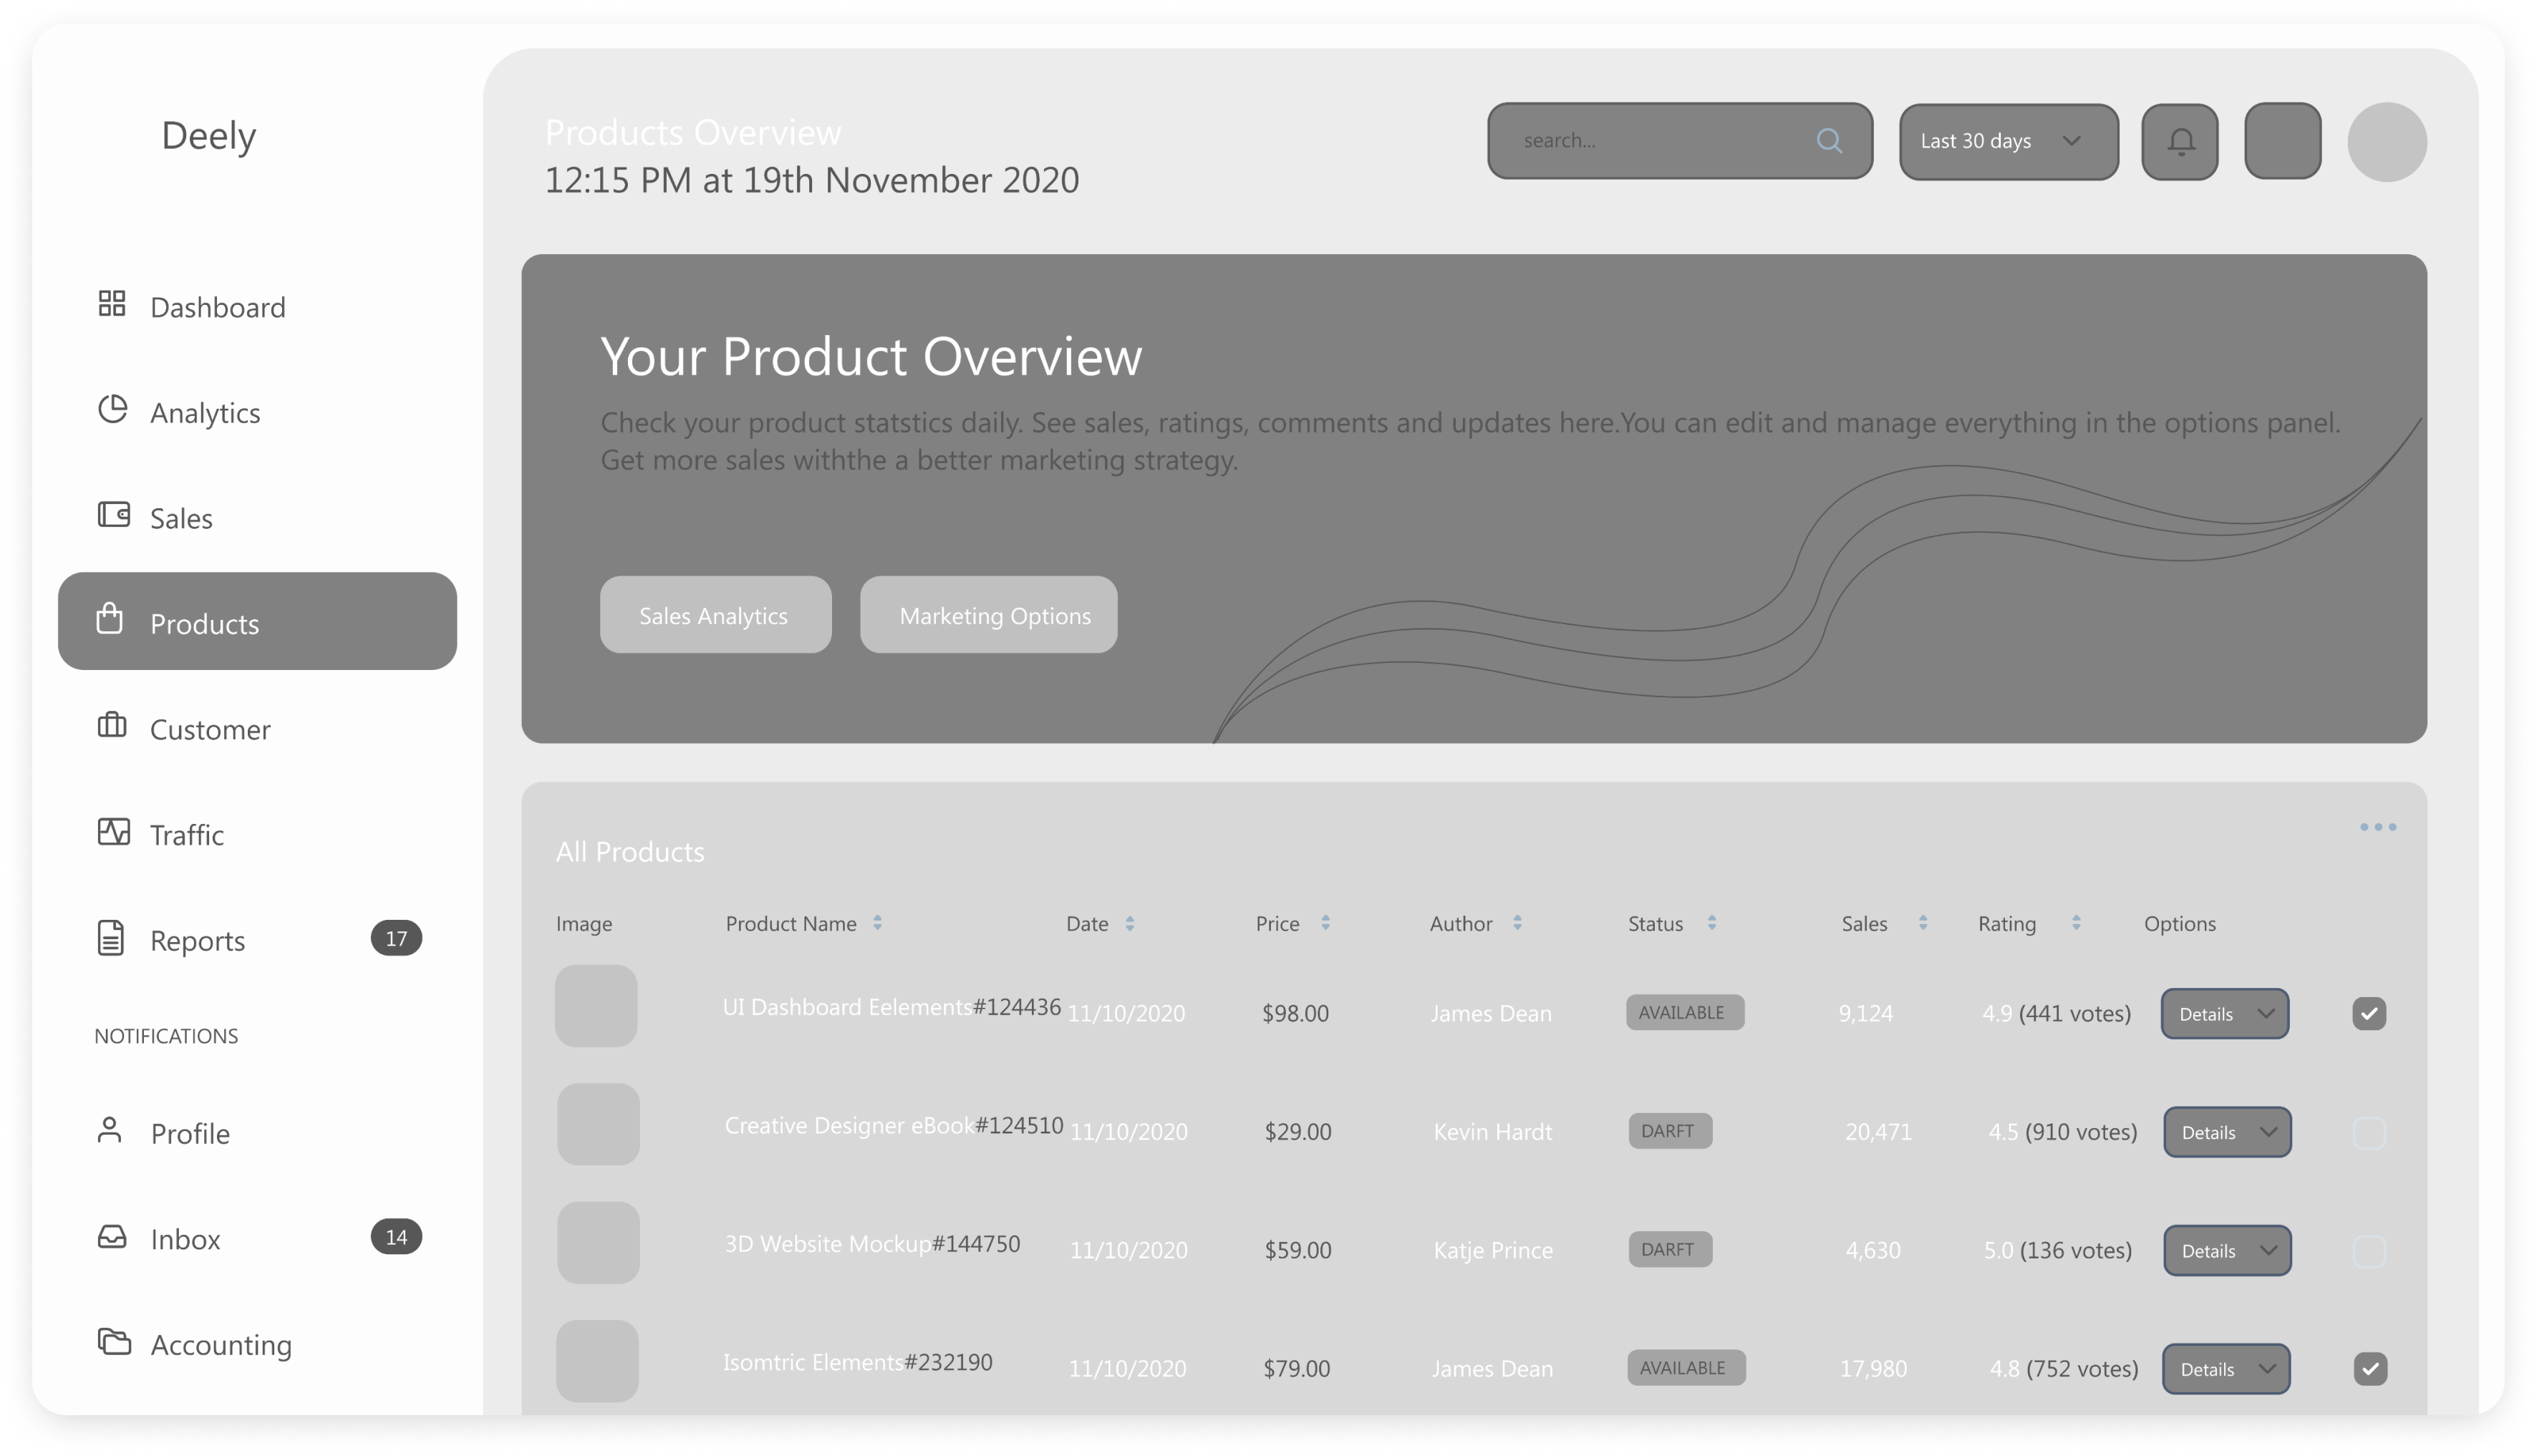 Wireframe of Deely products dashboard screen